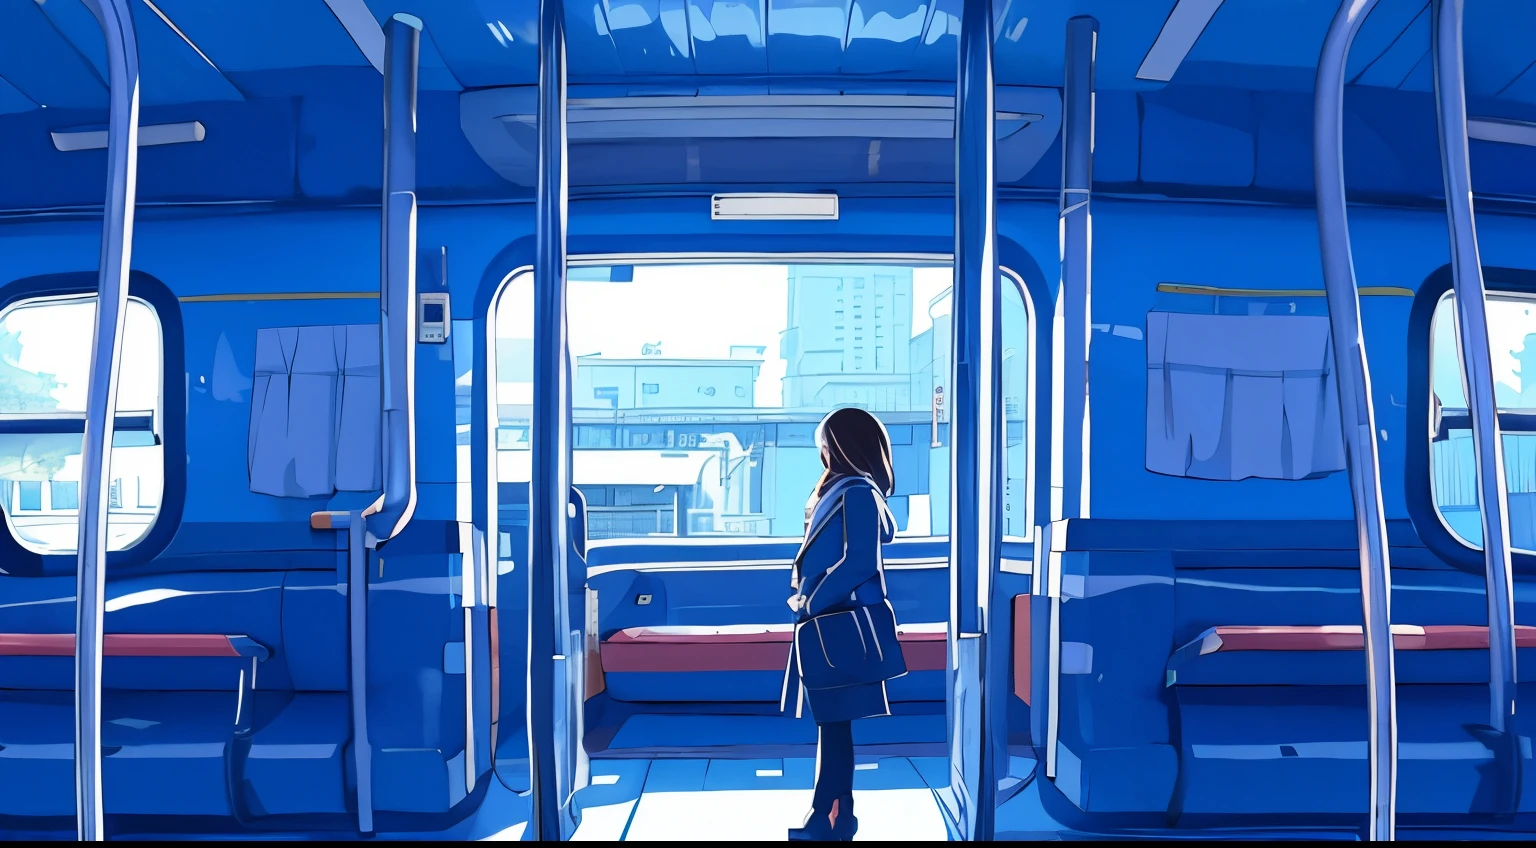 A woman in a blue coat standing on a train platform, looking at her phone.